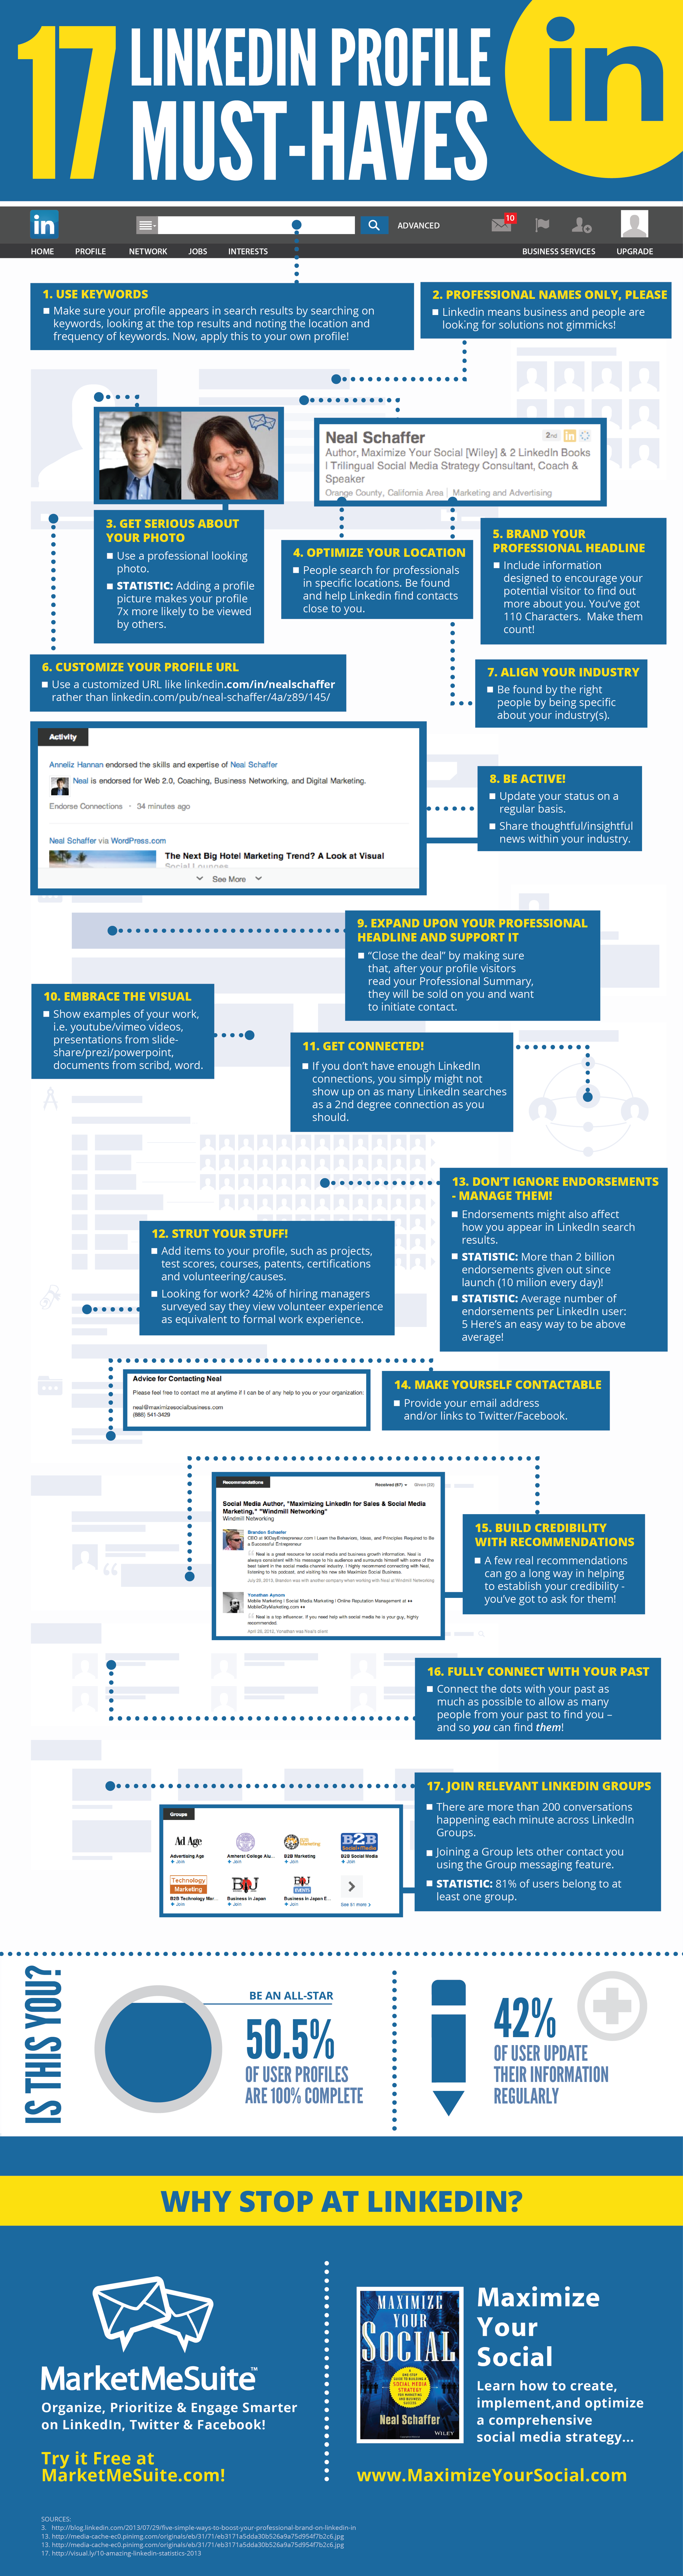 LinkedIn-Perfect-Profile-Tips-Summary-Infographic.png